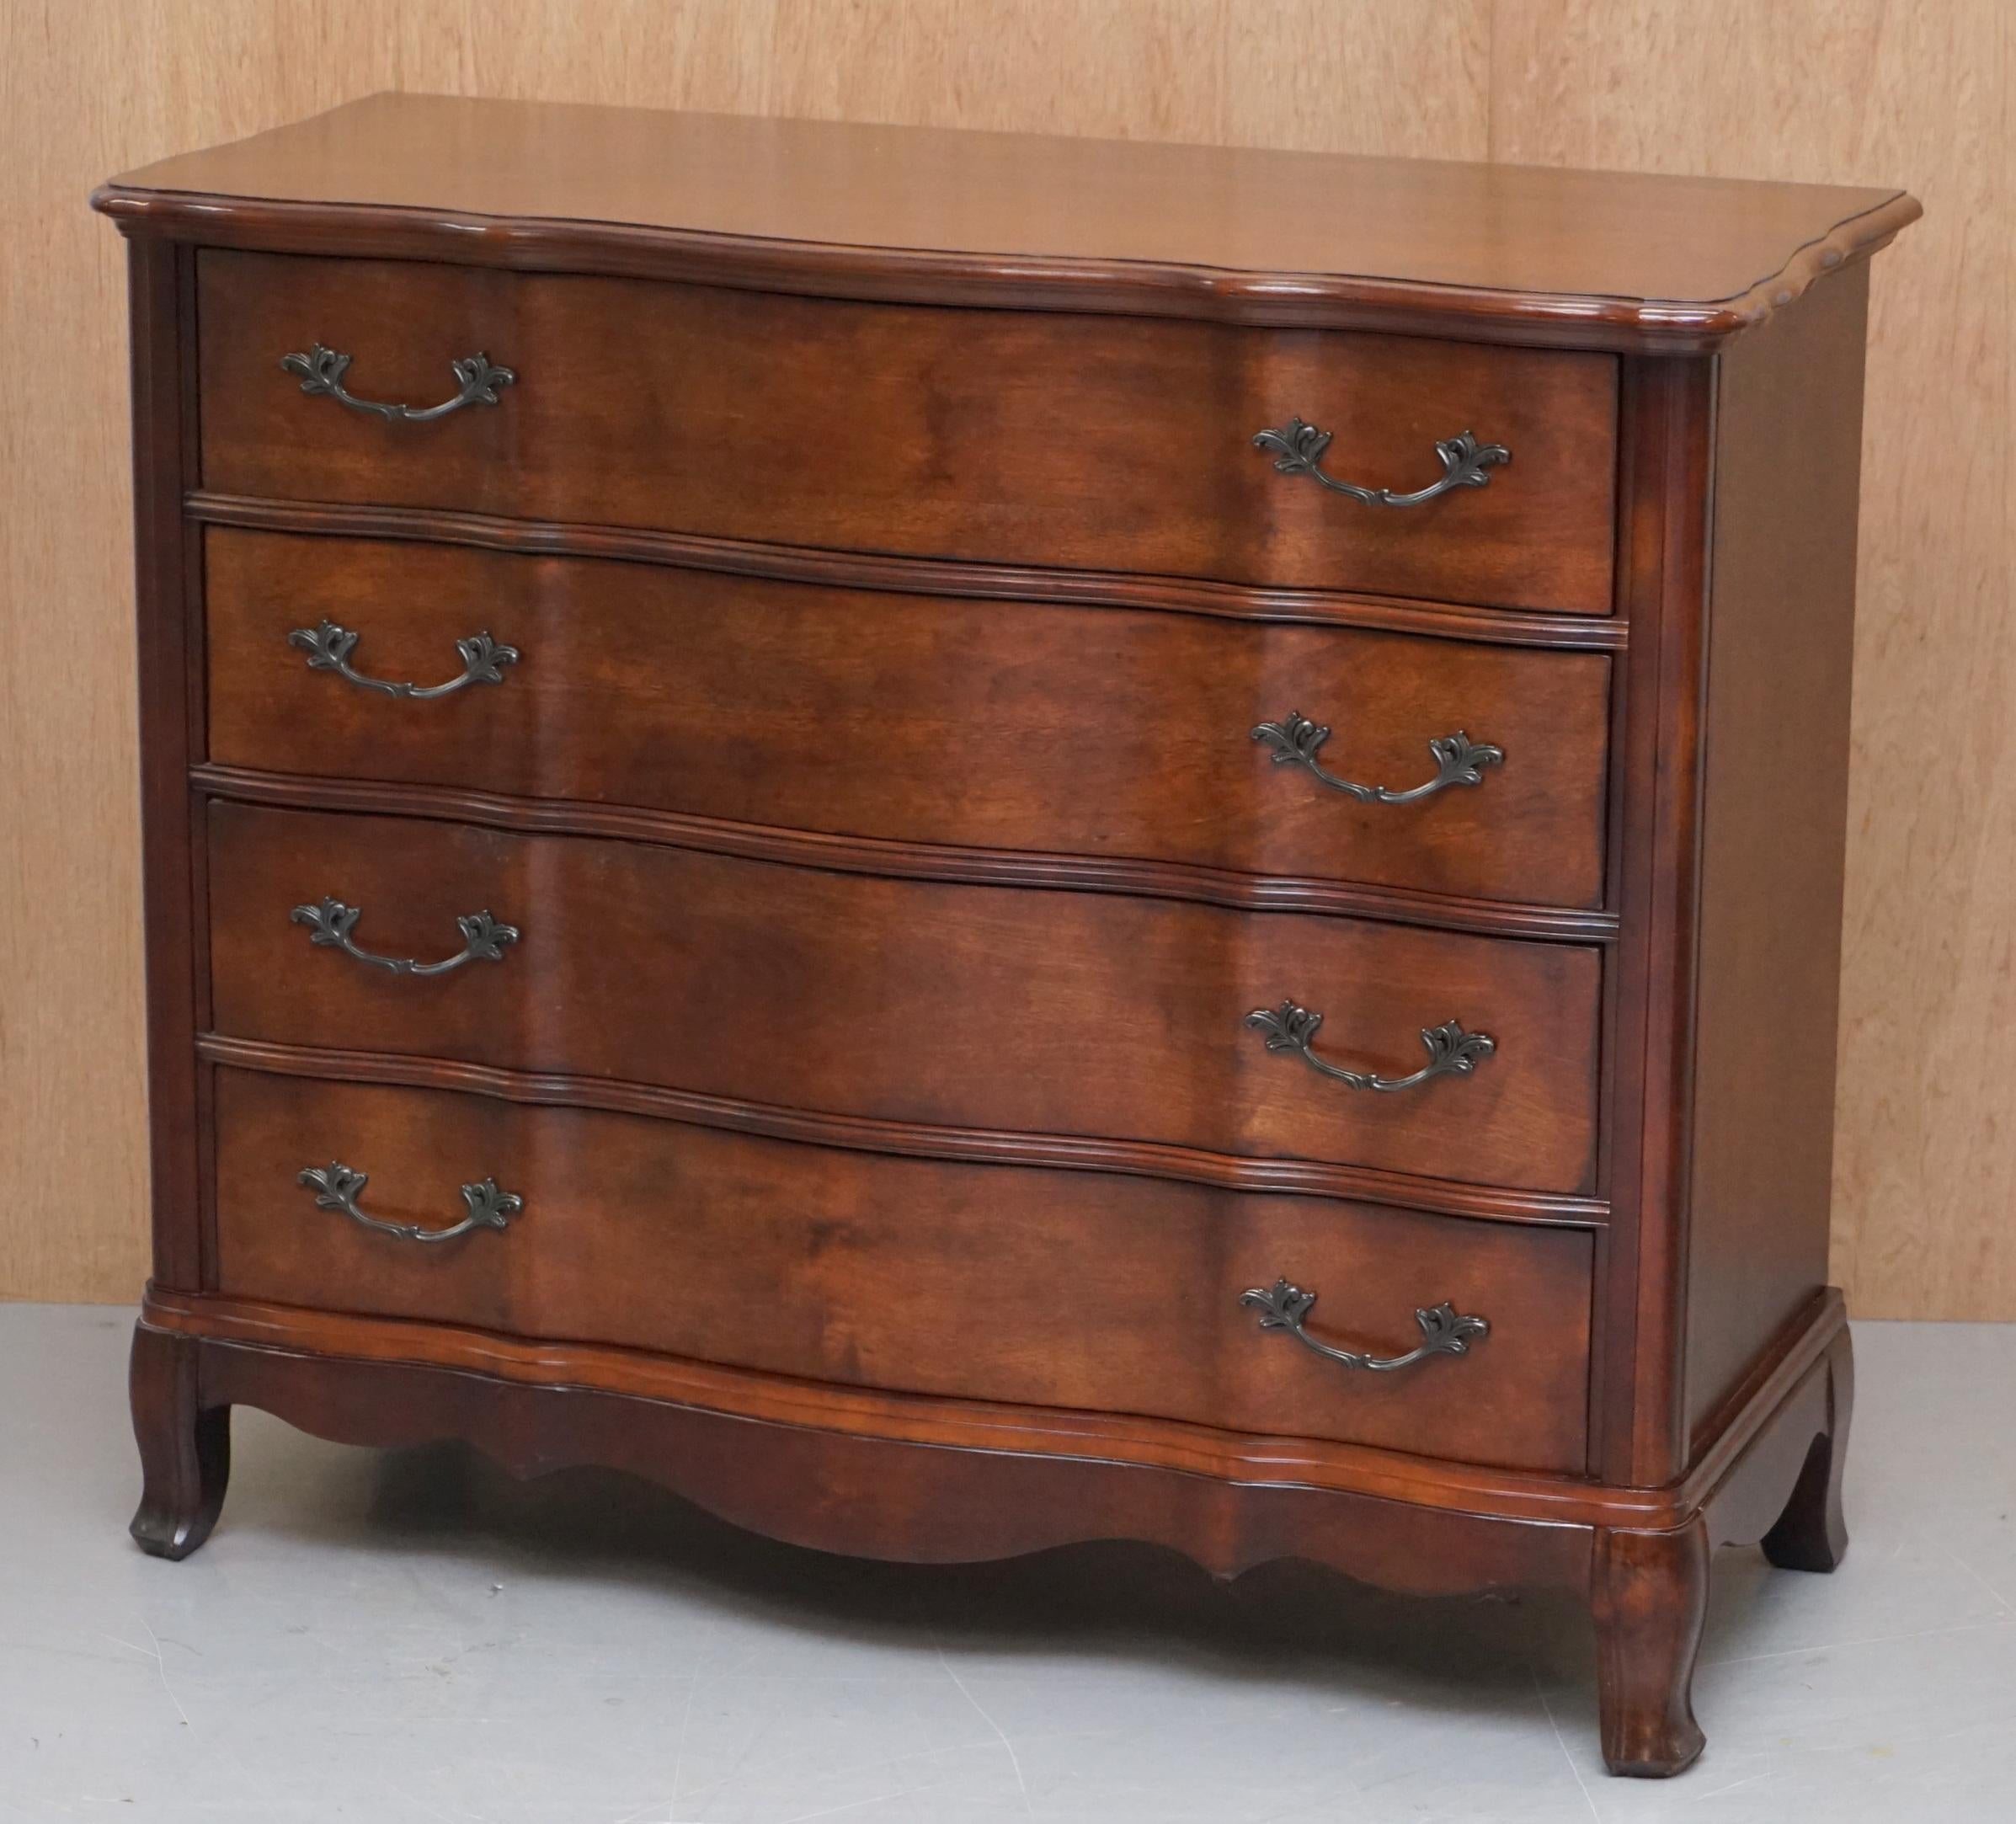 Victorian Larger Serpentine Fronted Ralph Lauren American Hardwood Chest of Drawers